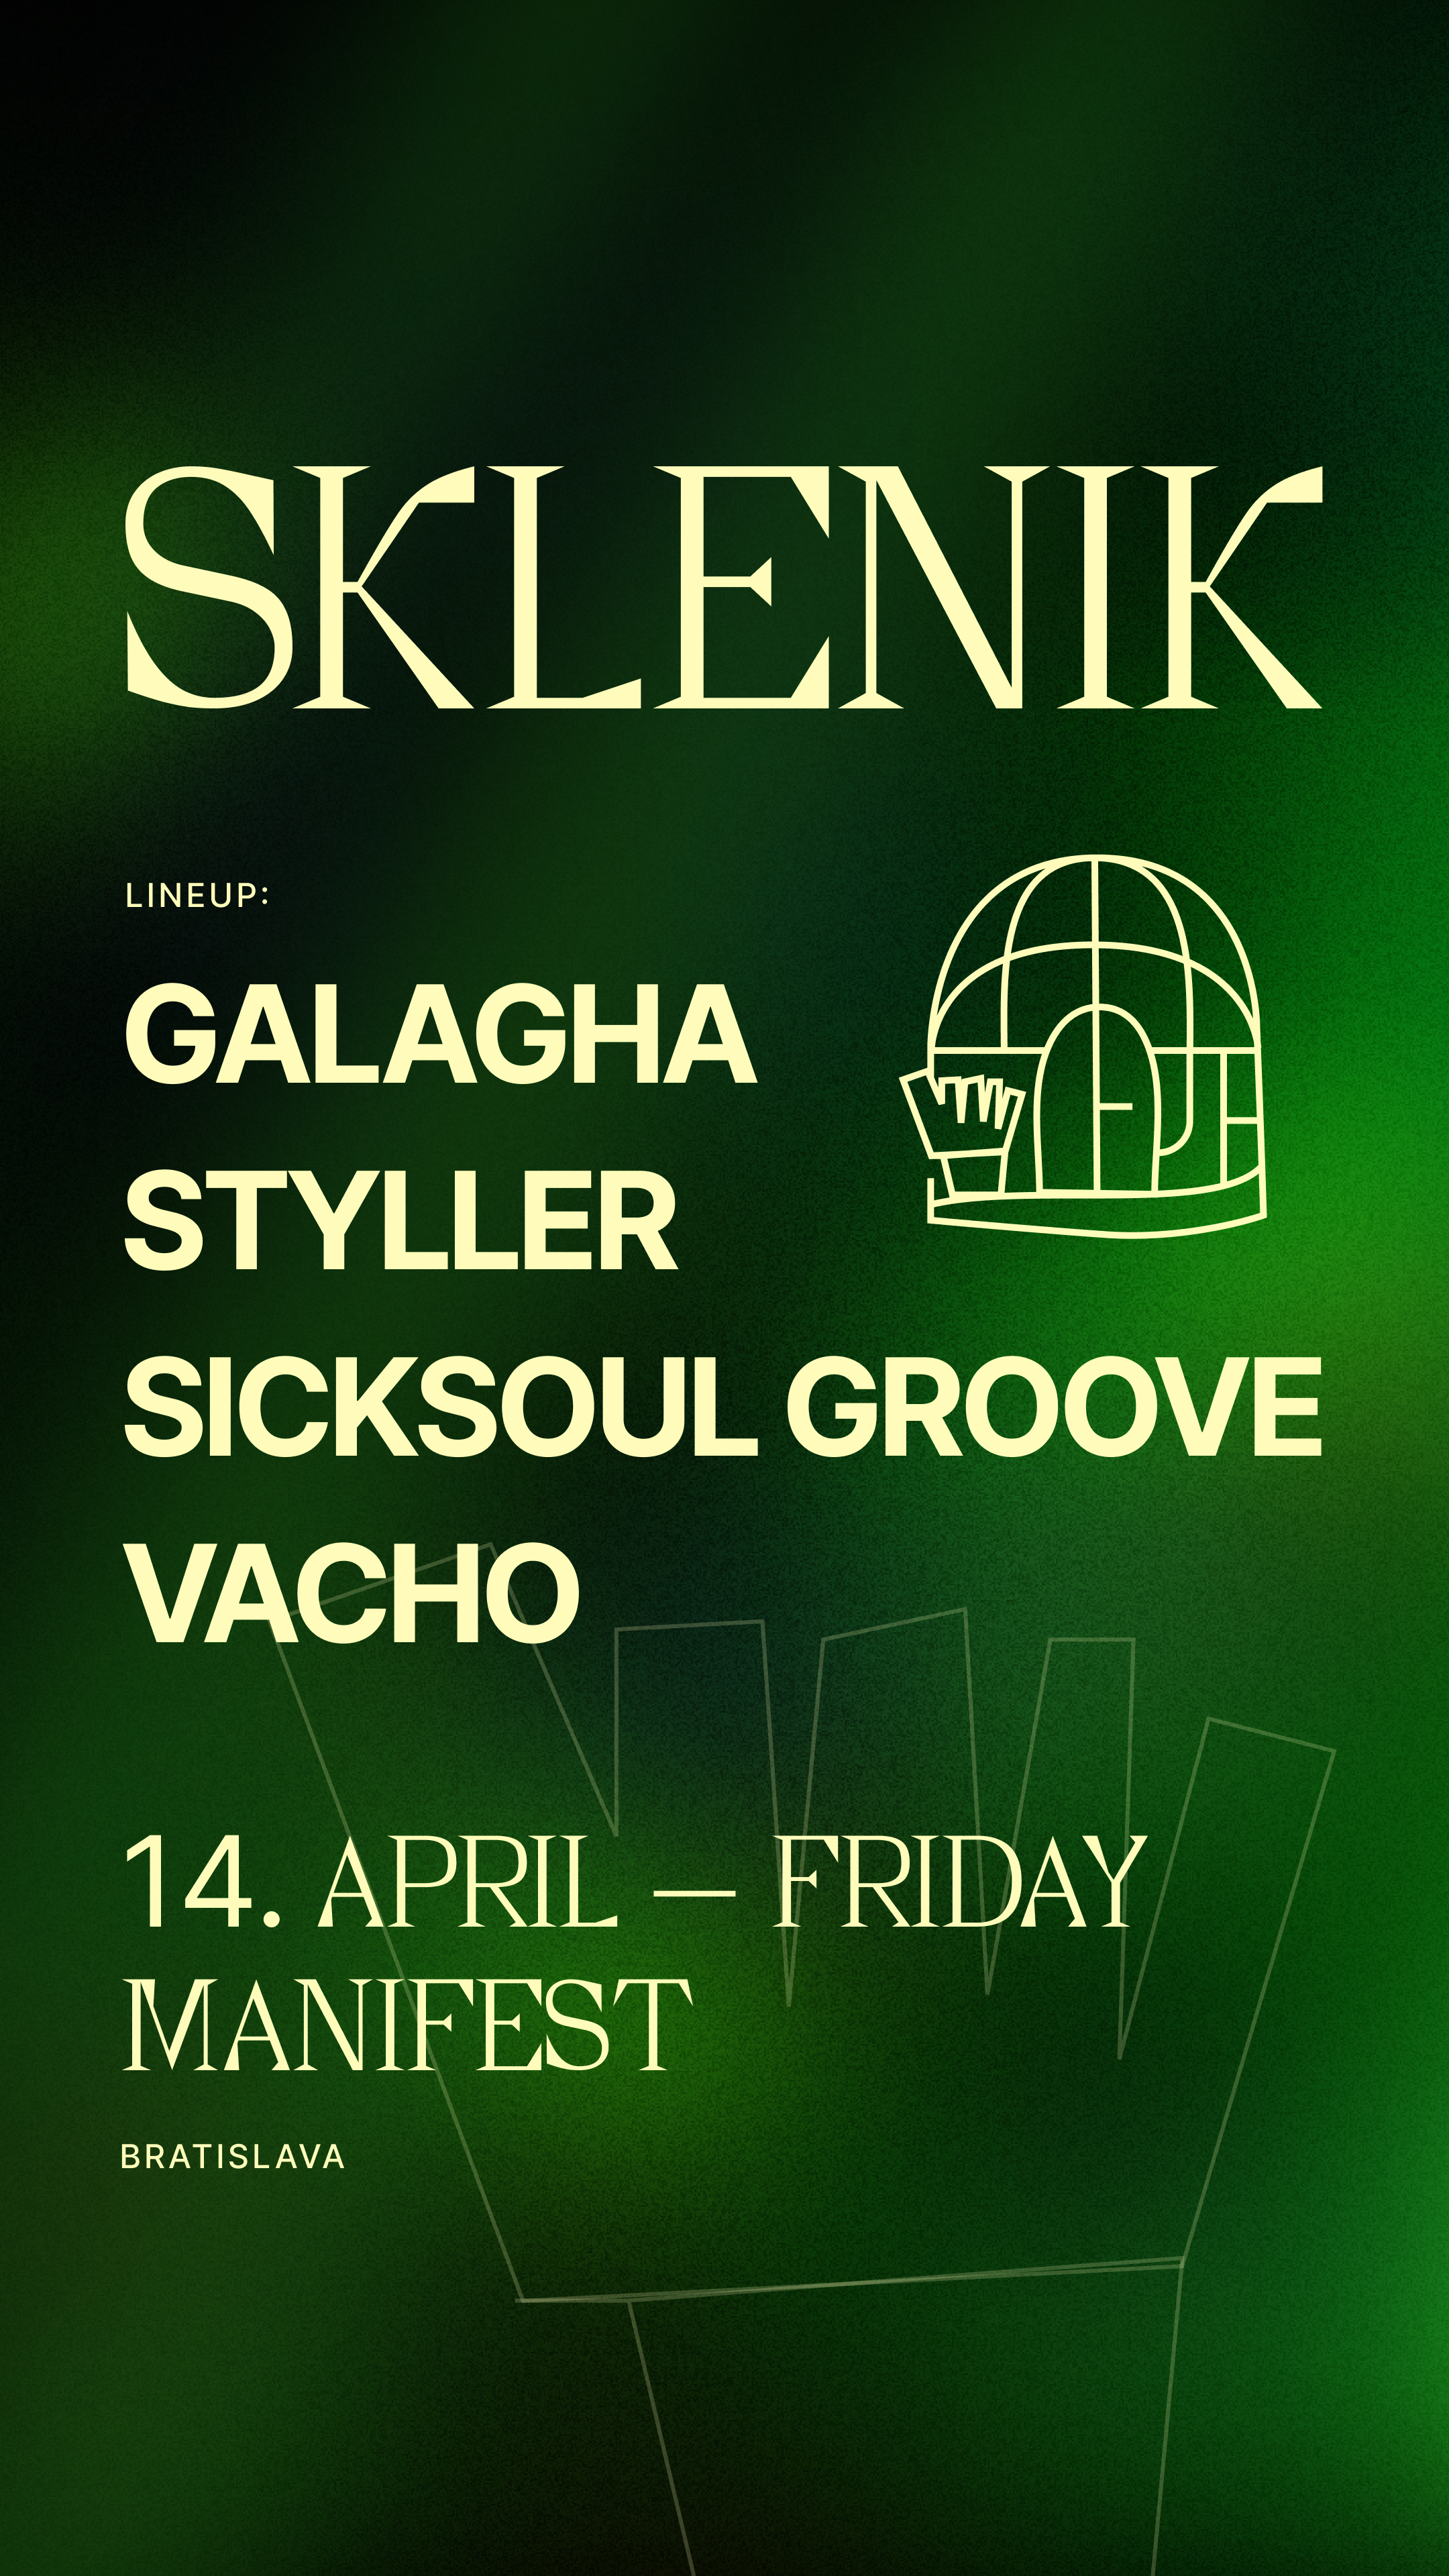 Sklenik #05 with Galagha - フライヤー表